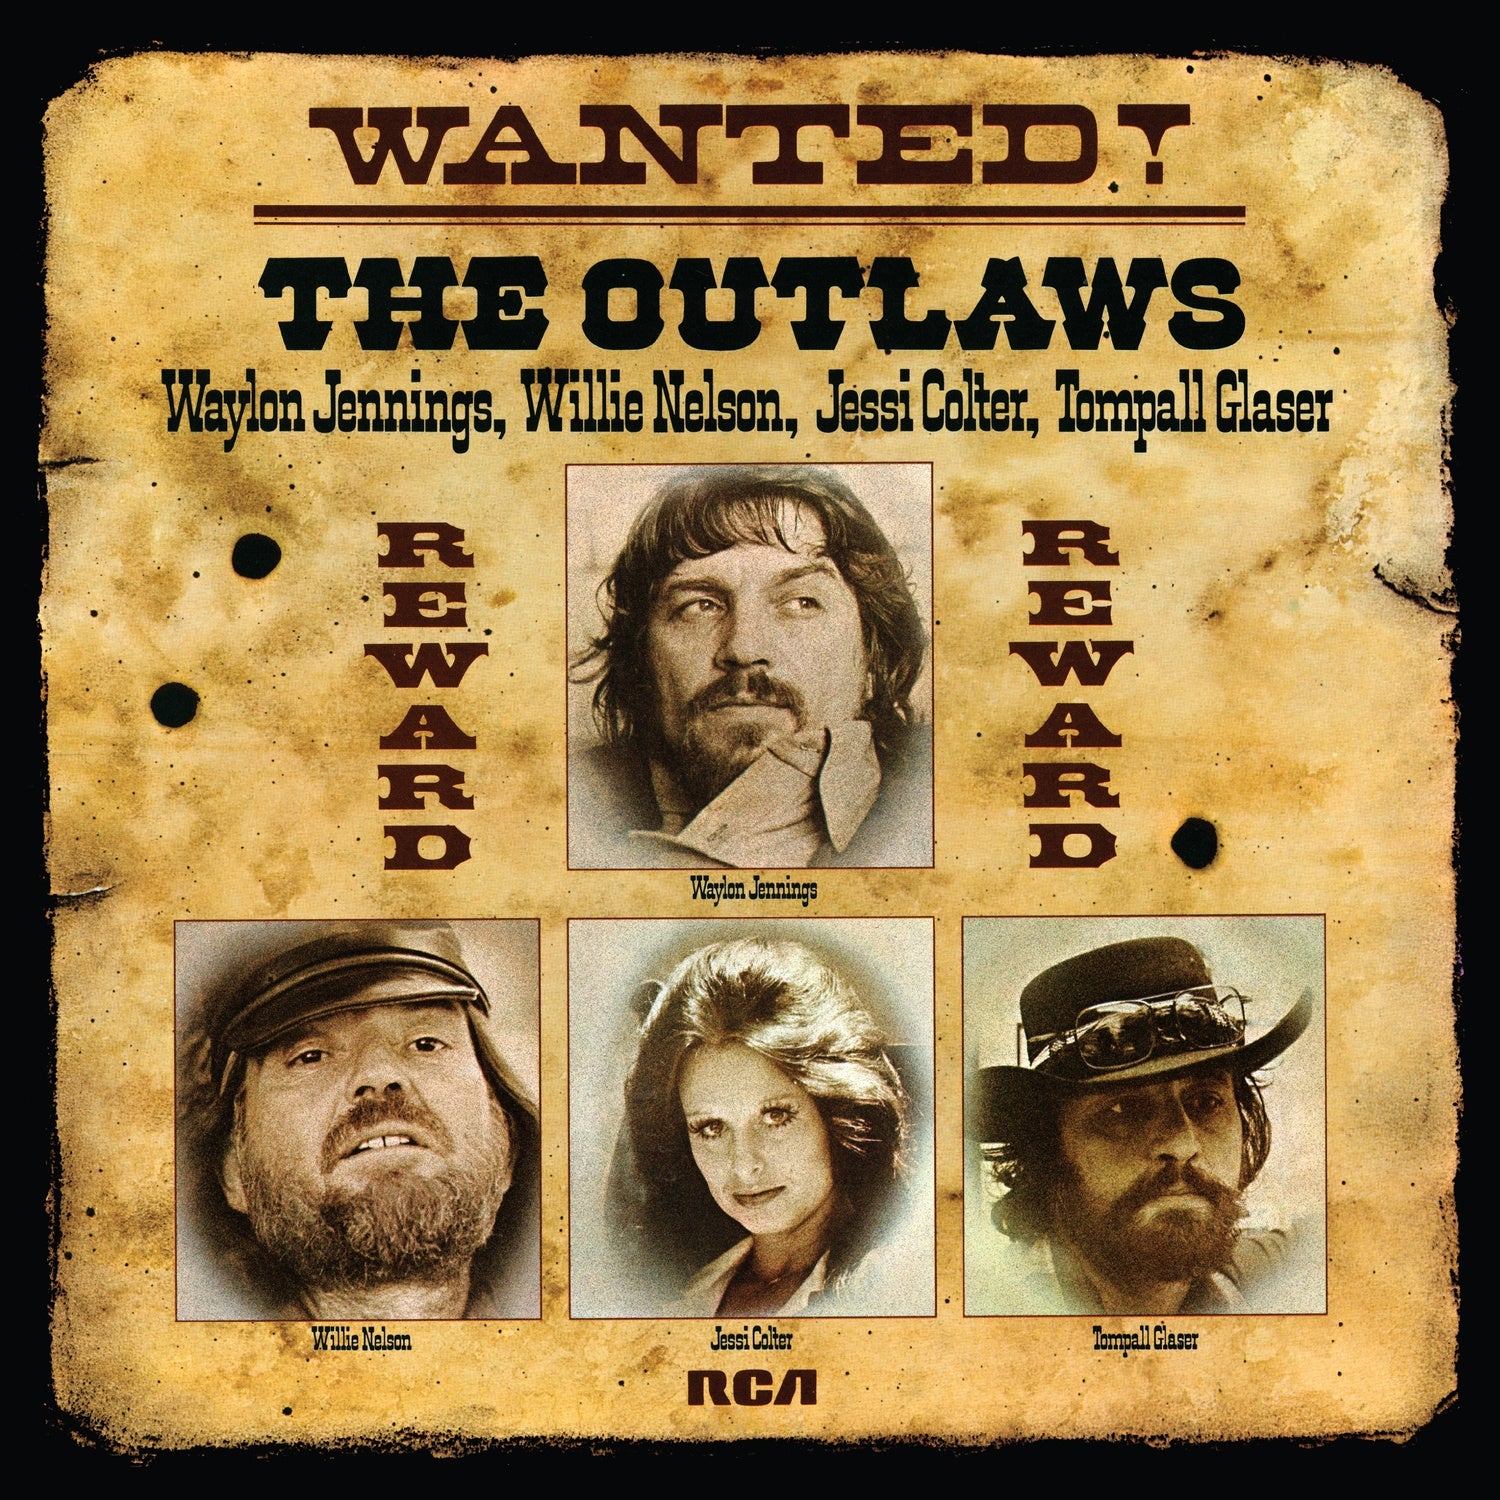 Waylon Jennings, Willie Nelson, Jessi Colter, Tompall Glaser ‎– Wanted! The Outlaws (1976) - New Vinyl LP Record 2019 We Are Vinyl Reissue - Country